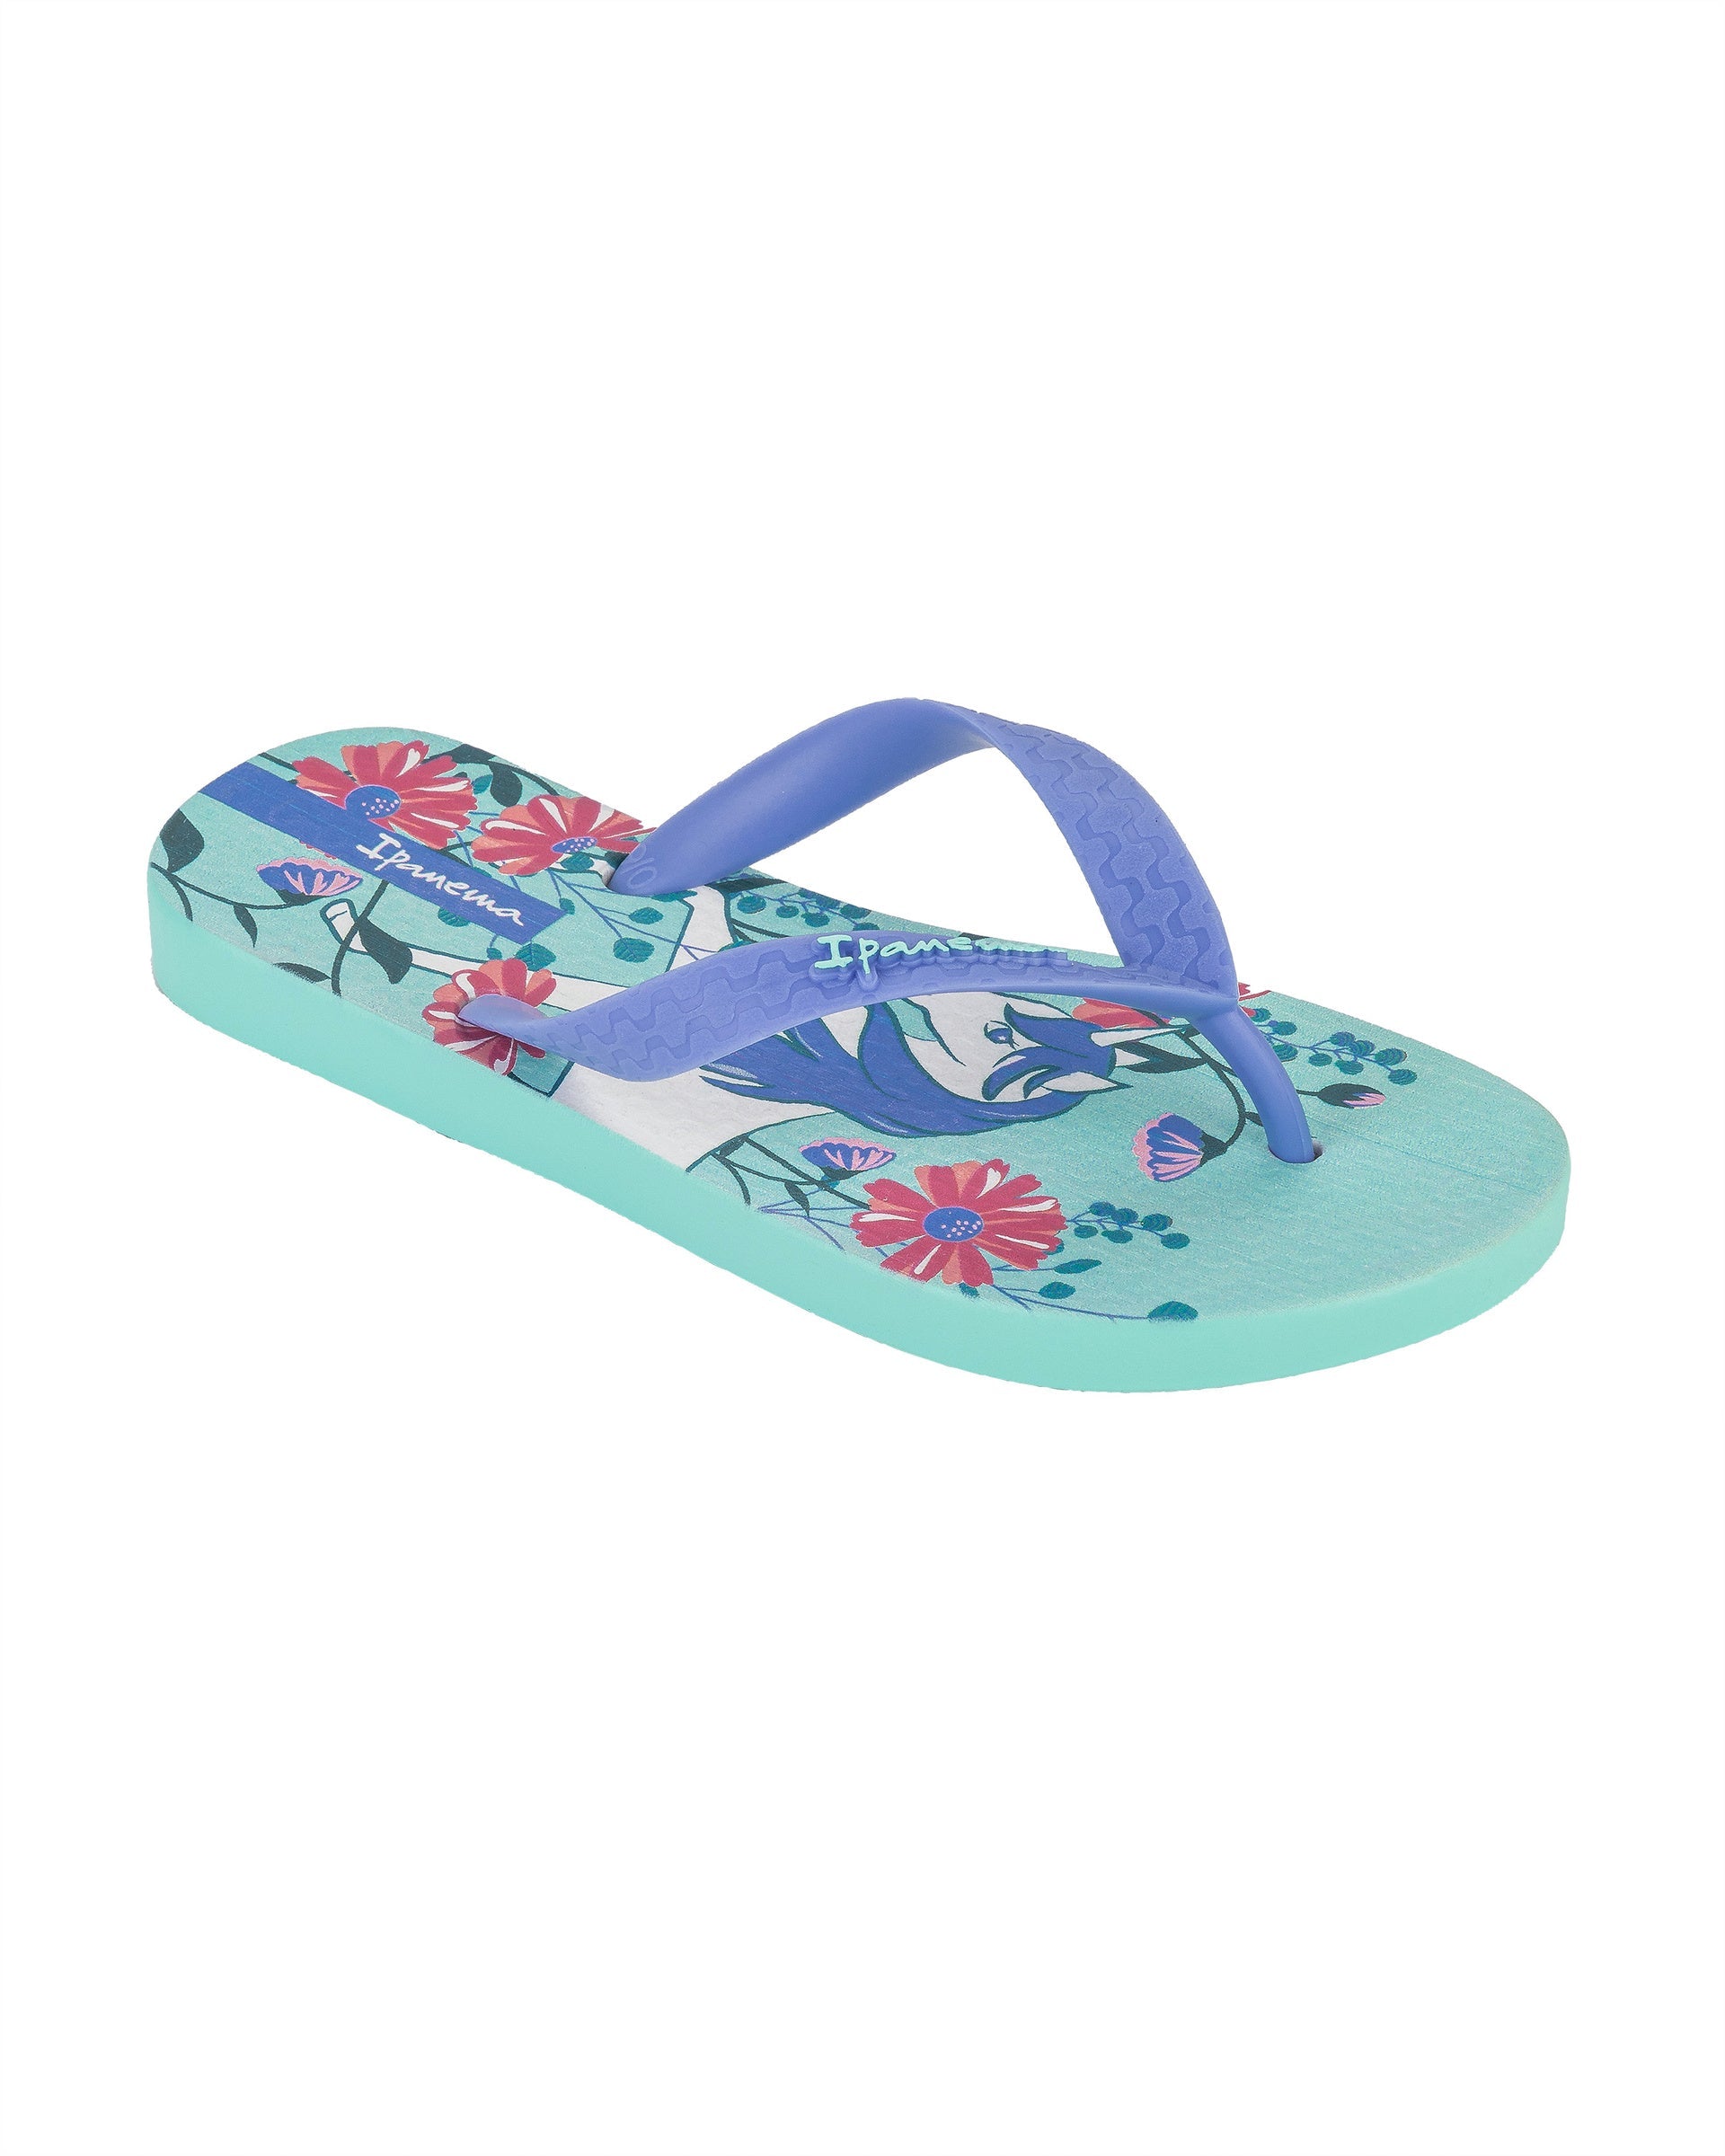 Angled view of a blue Ipanema Temas kids flip flop with unicorn and flower print.